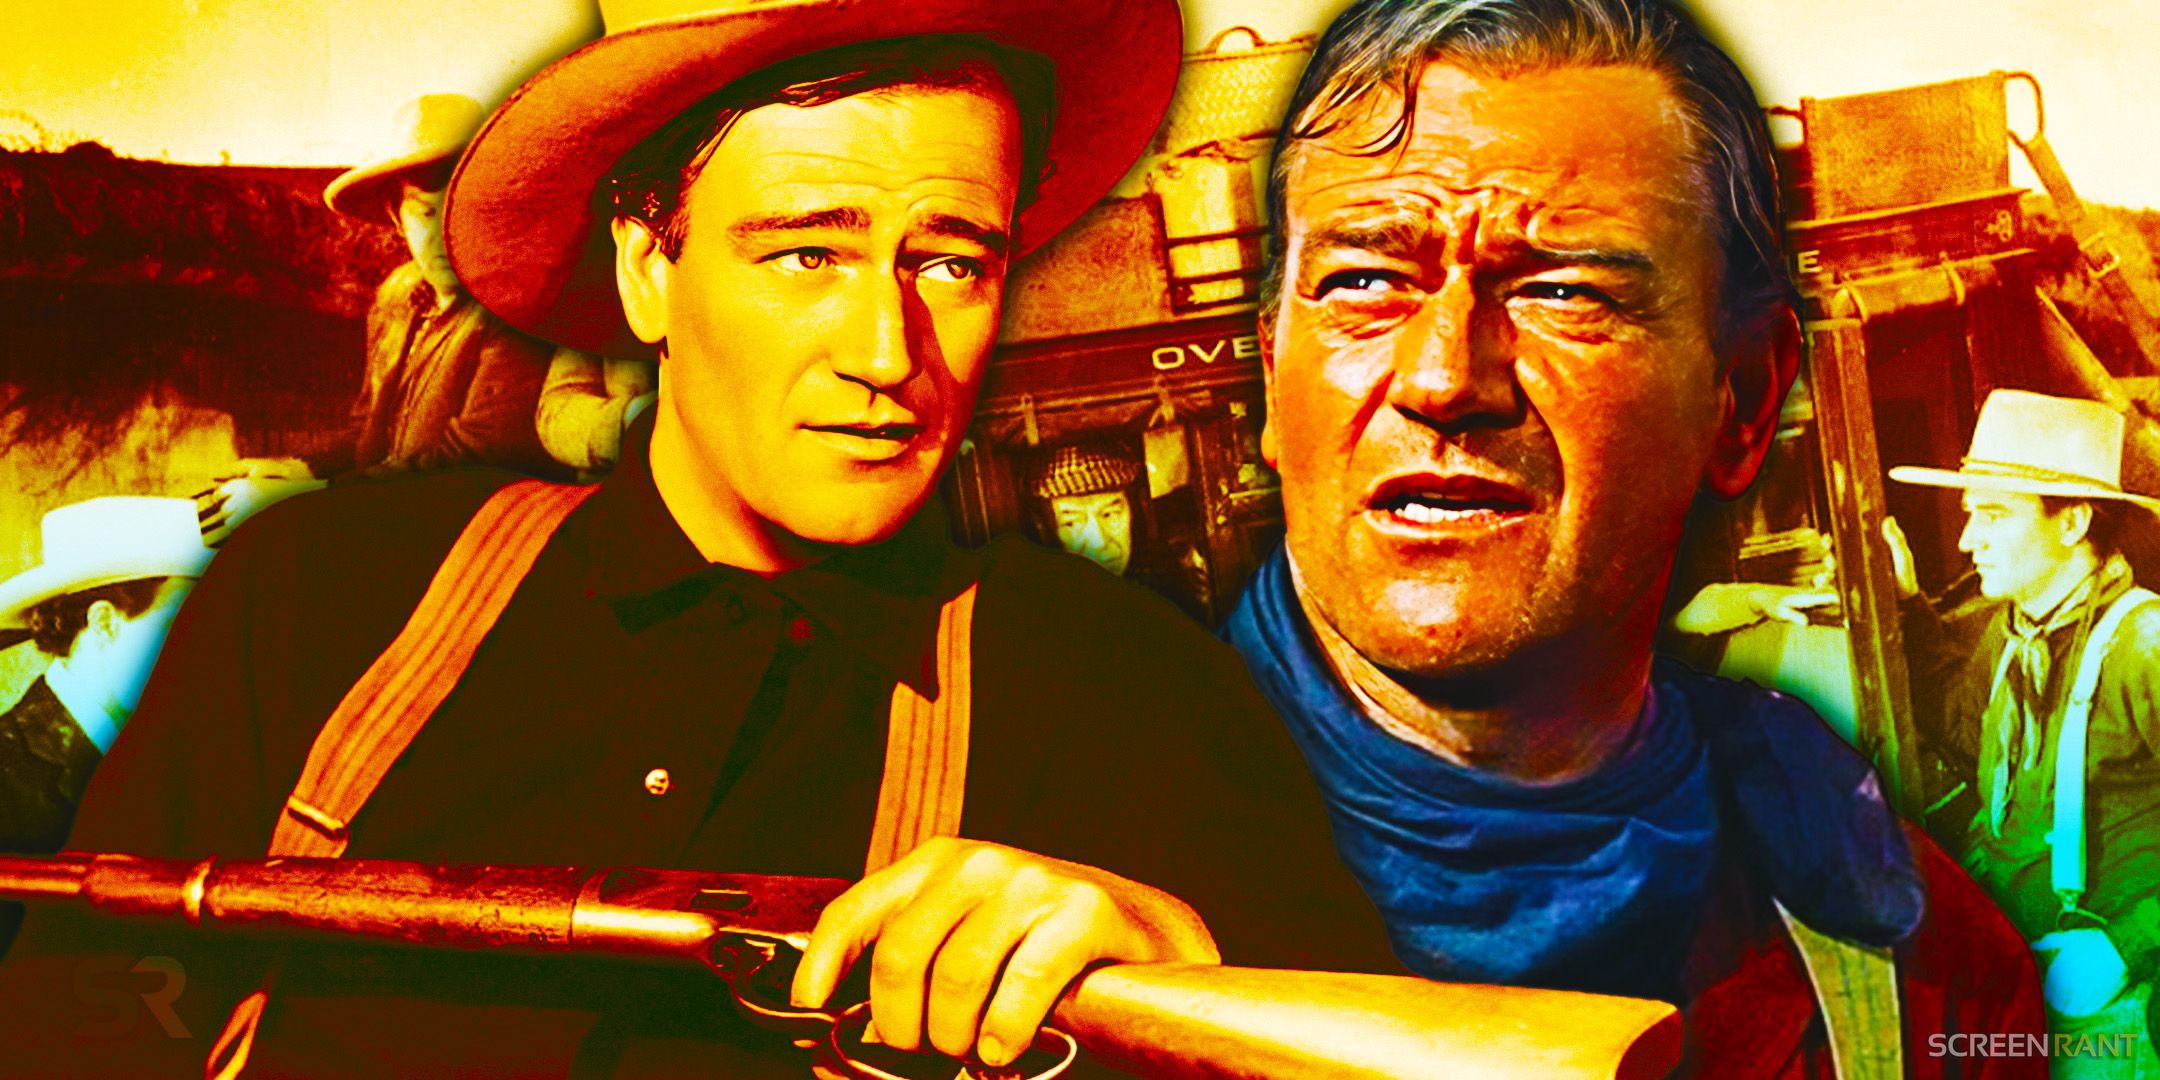 John Wayne as The Ringo Kid holding a rifle in Stagecoach alongside Wayne playing Ethan Edwards in The Searchers